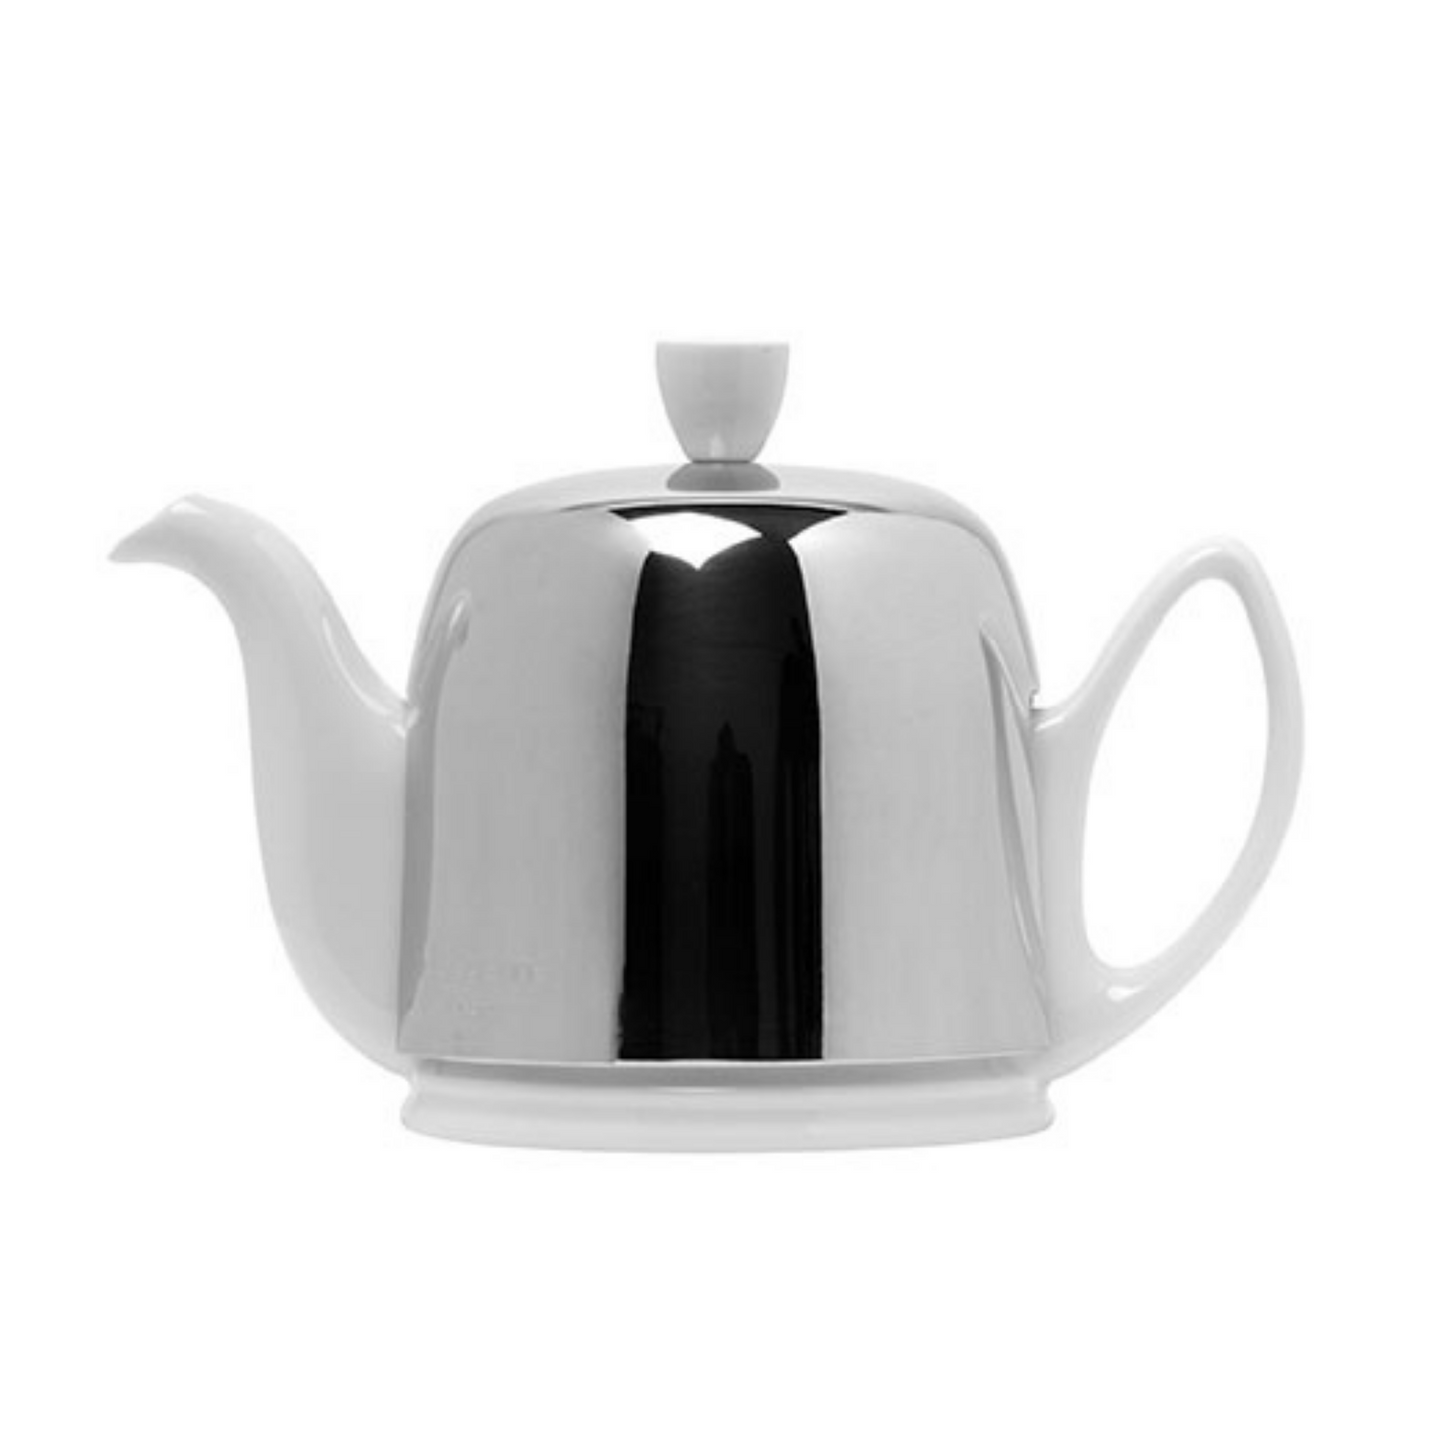 Degrenne Canada Salam White Teapot 4-cup Clementine Boutique 